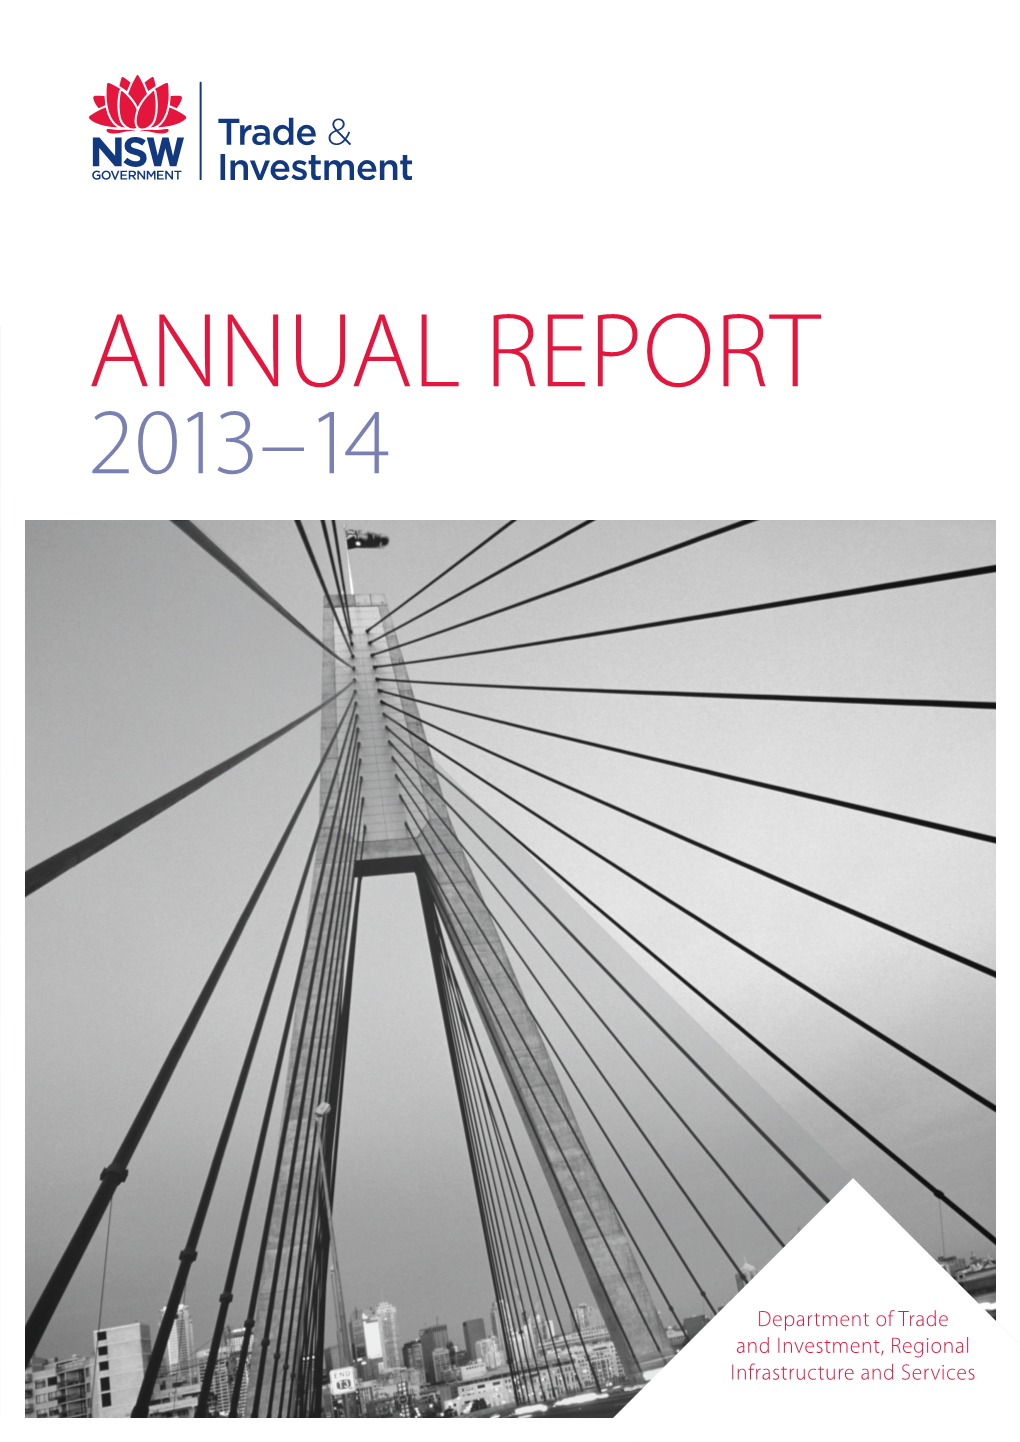 Trade & Investment Annual Report 2013-14